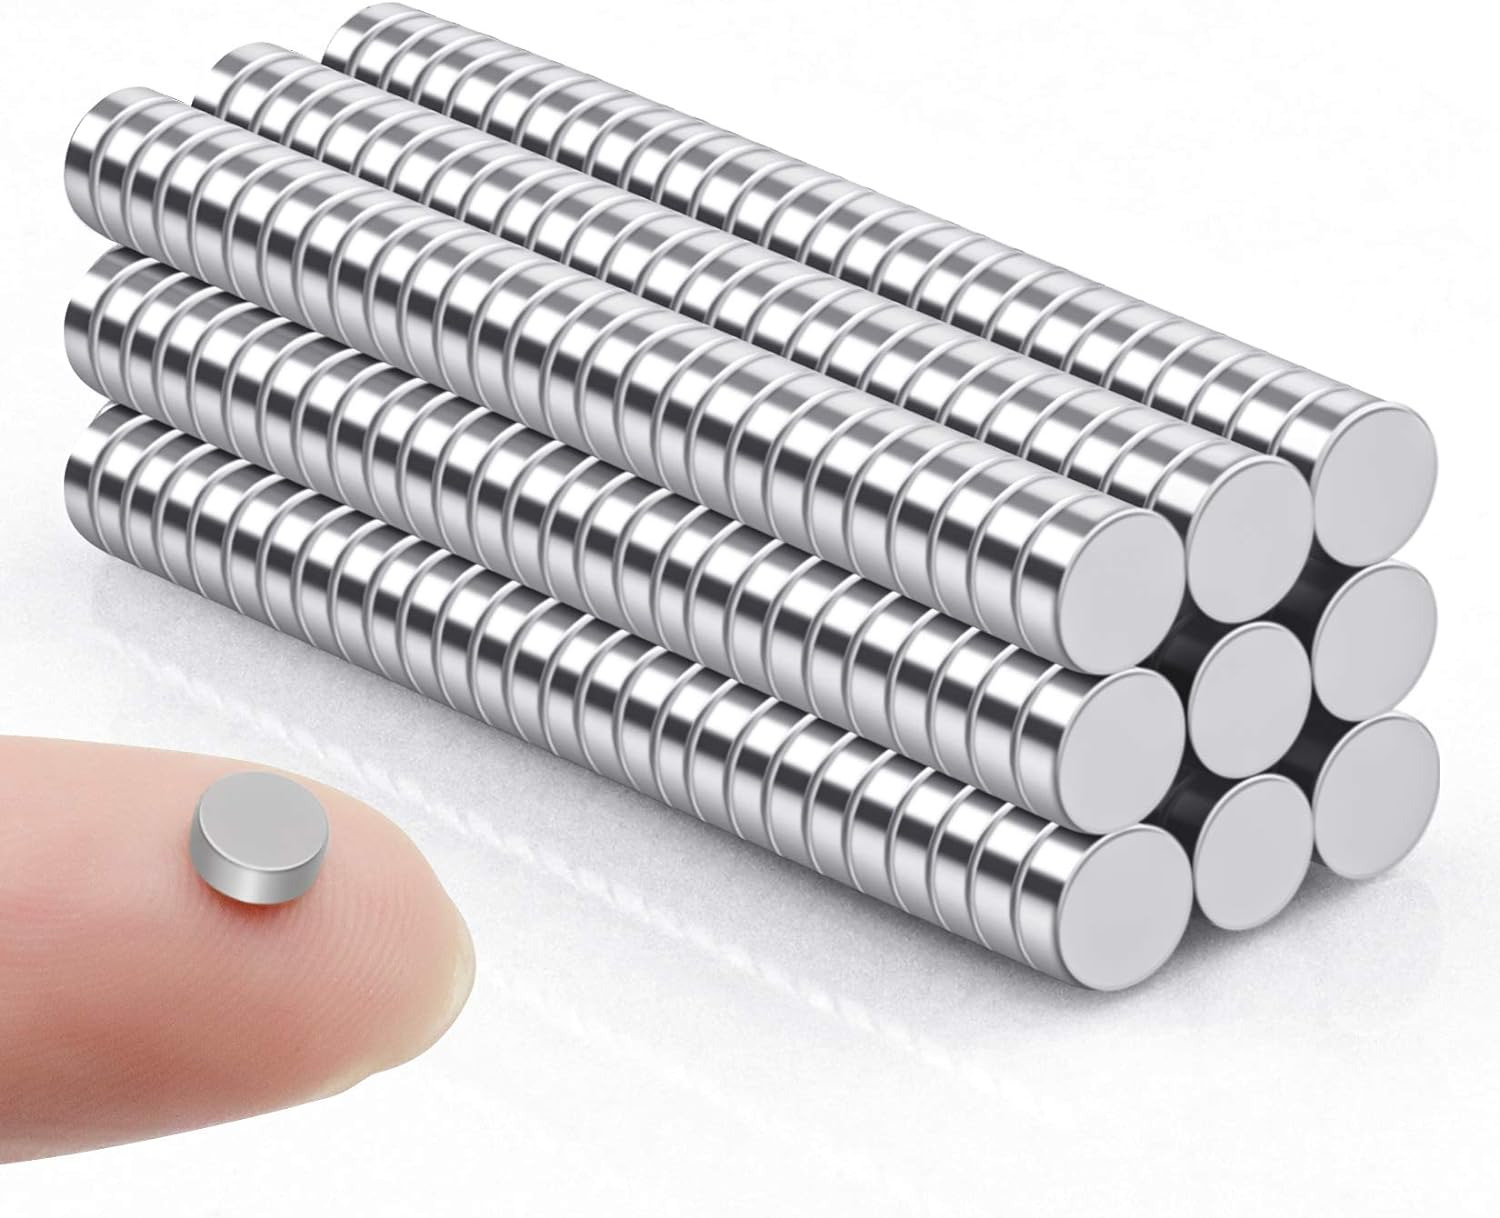 100 Pack Mini Neodymium Magnets 5 x 2mm for DIY Crafts Whiteboard and Office